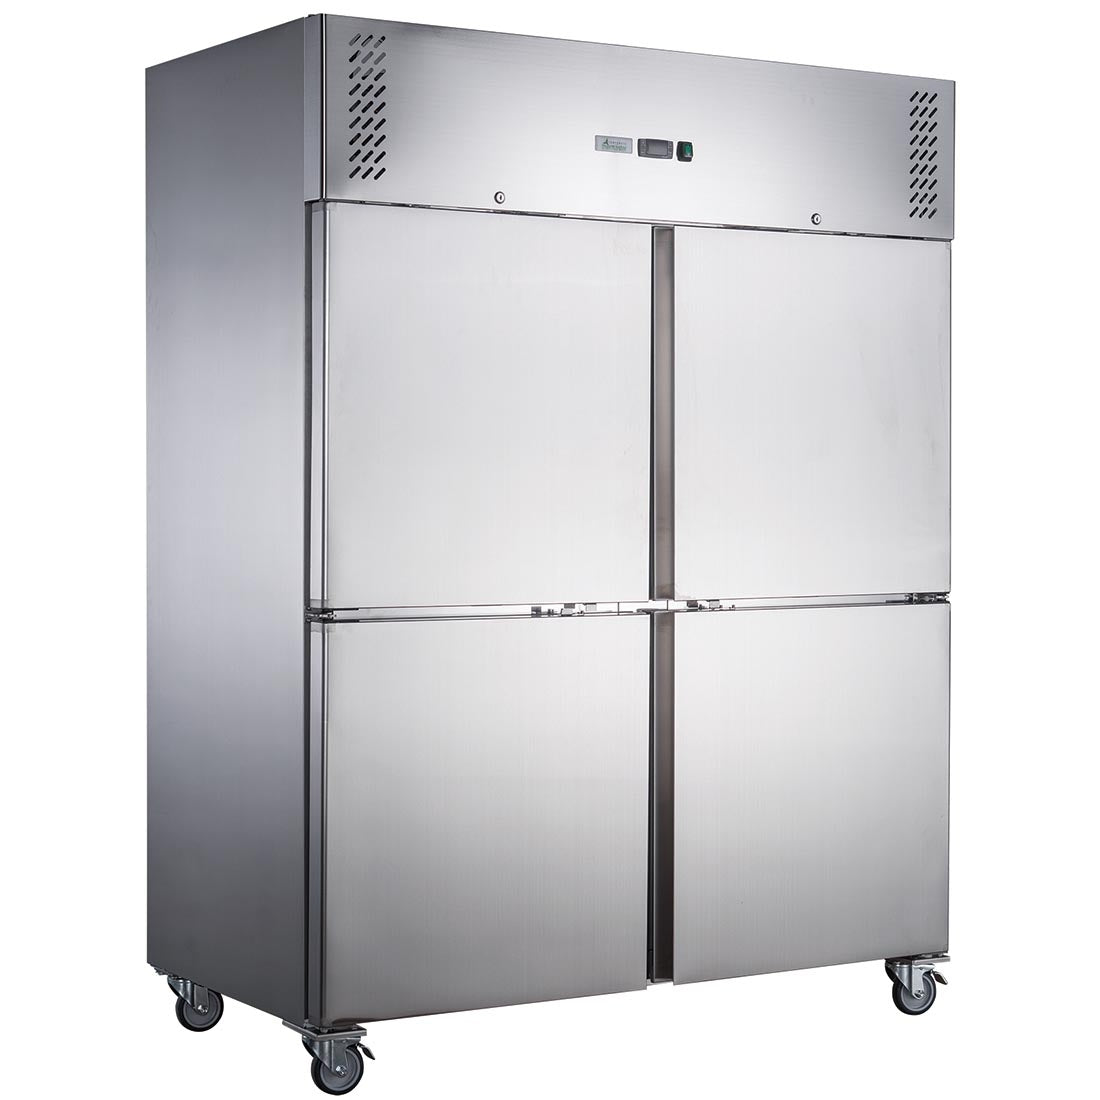 FED-X S/S Four Door Upright Freezer - XURF1200S2V  - Temperate Thermaster